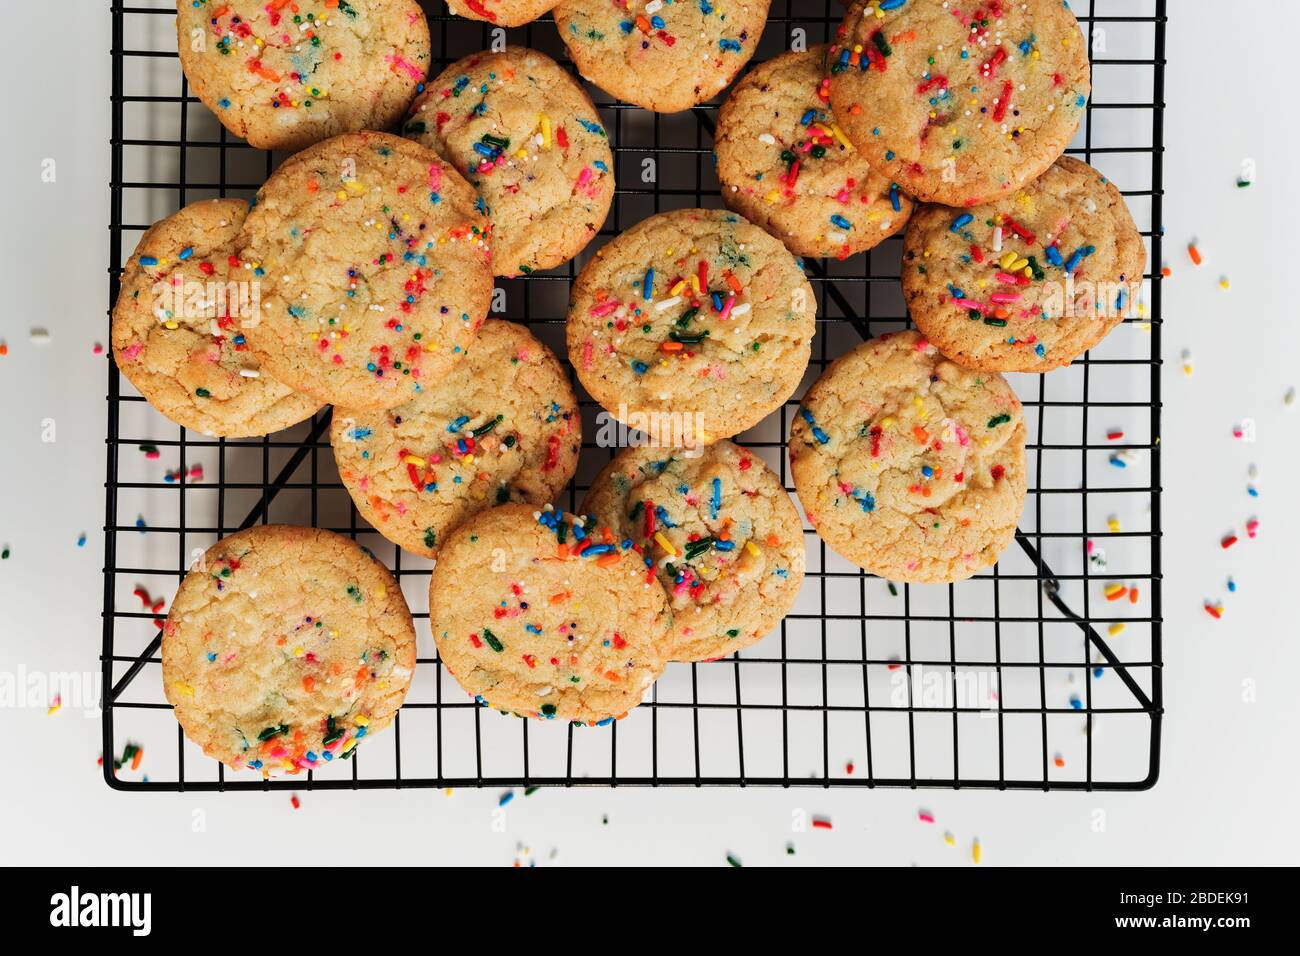 Homemade cookies with colorful sprinkleÂ on baking rackÂ Stock Photo